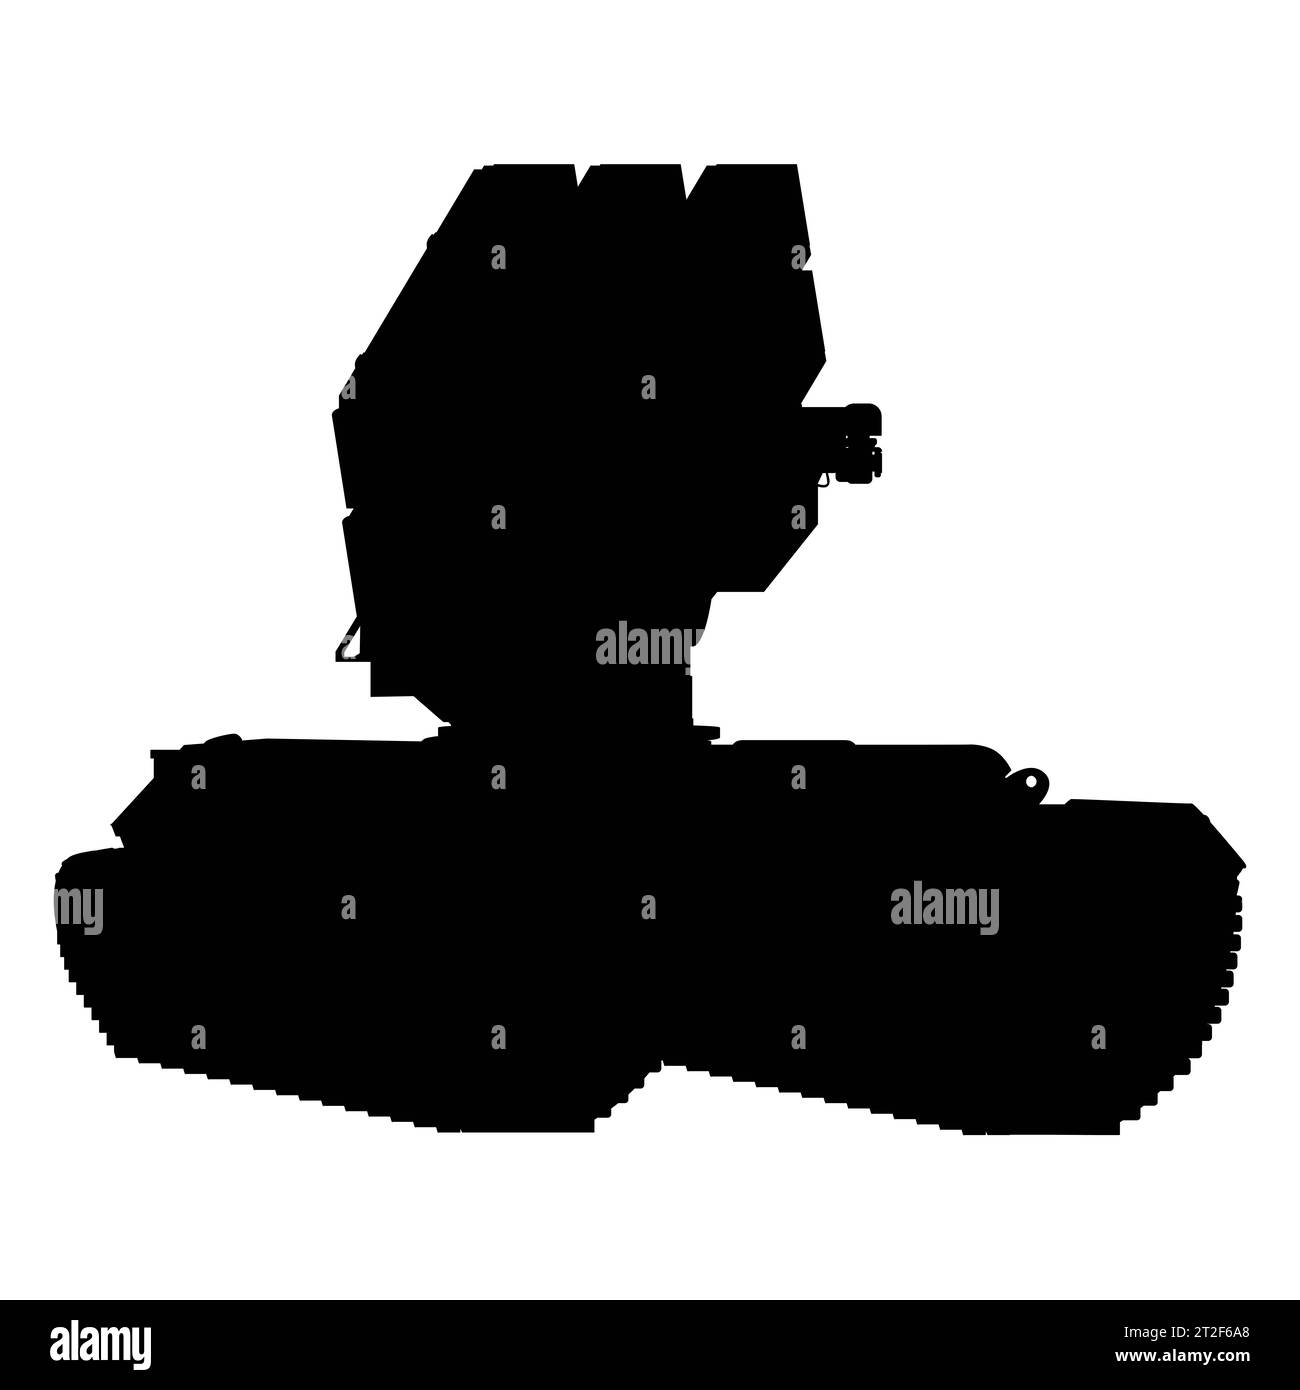 Self-propelled Anti - aircraft air defense system silhouette. Ilustration isolated on white background. Stock Photo